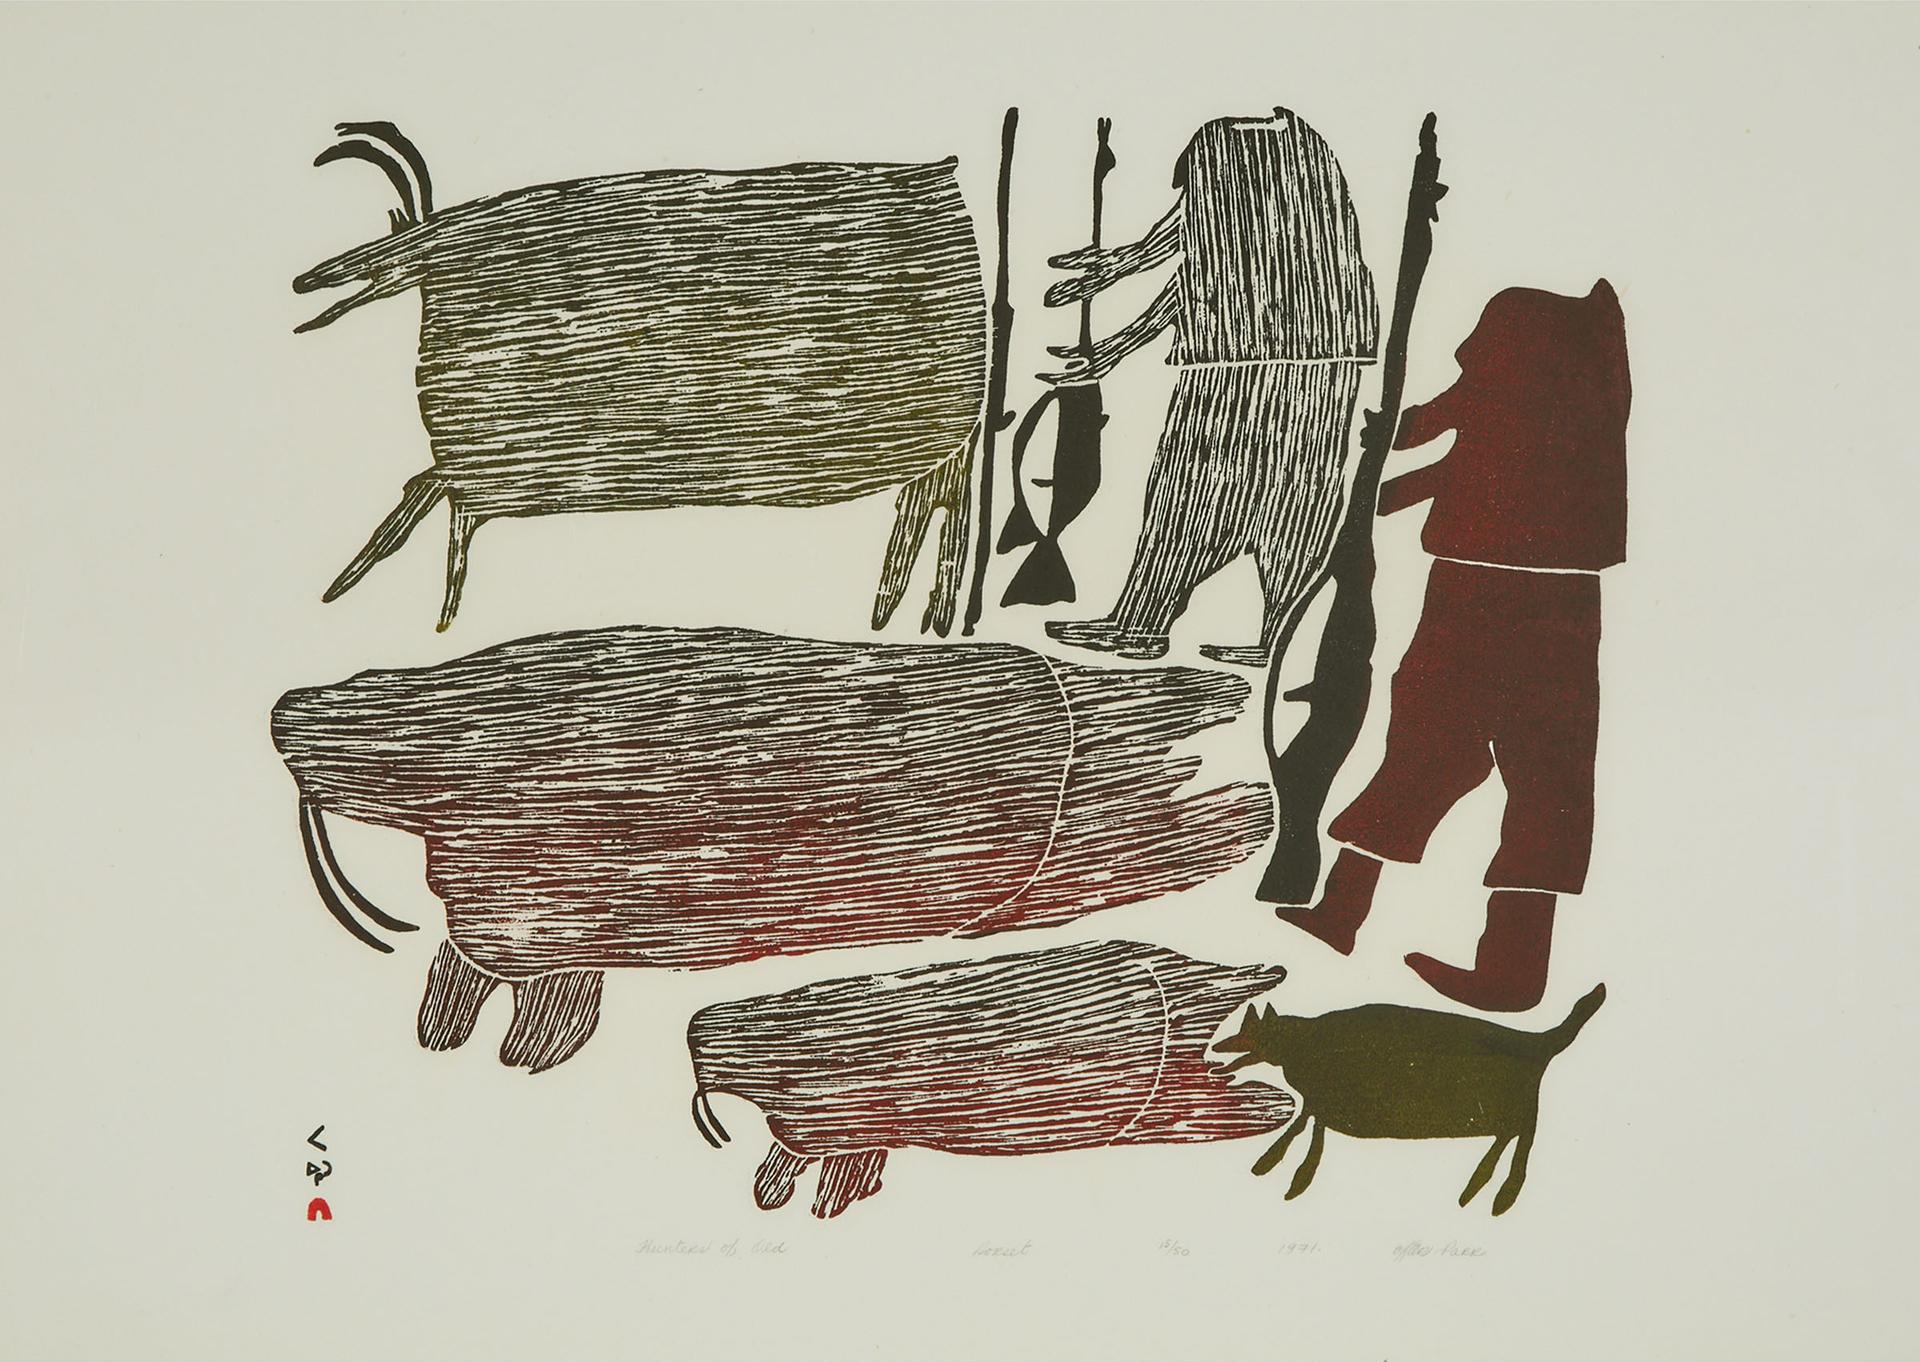 Parr (1893-1969) - Hunters Of Old, 1971